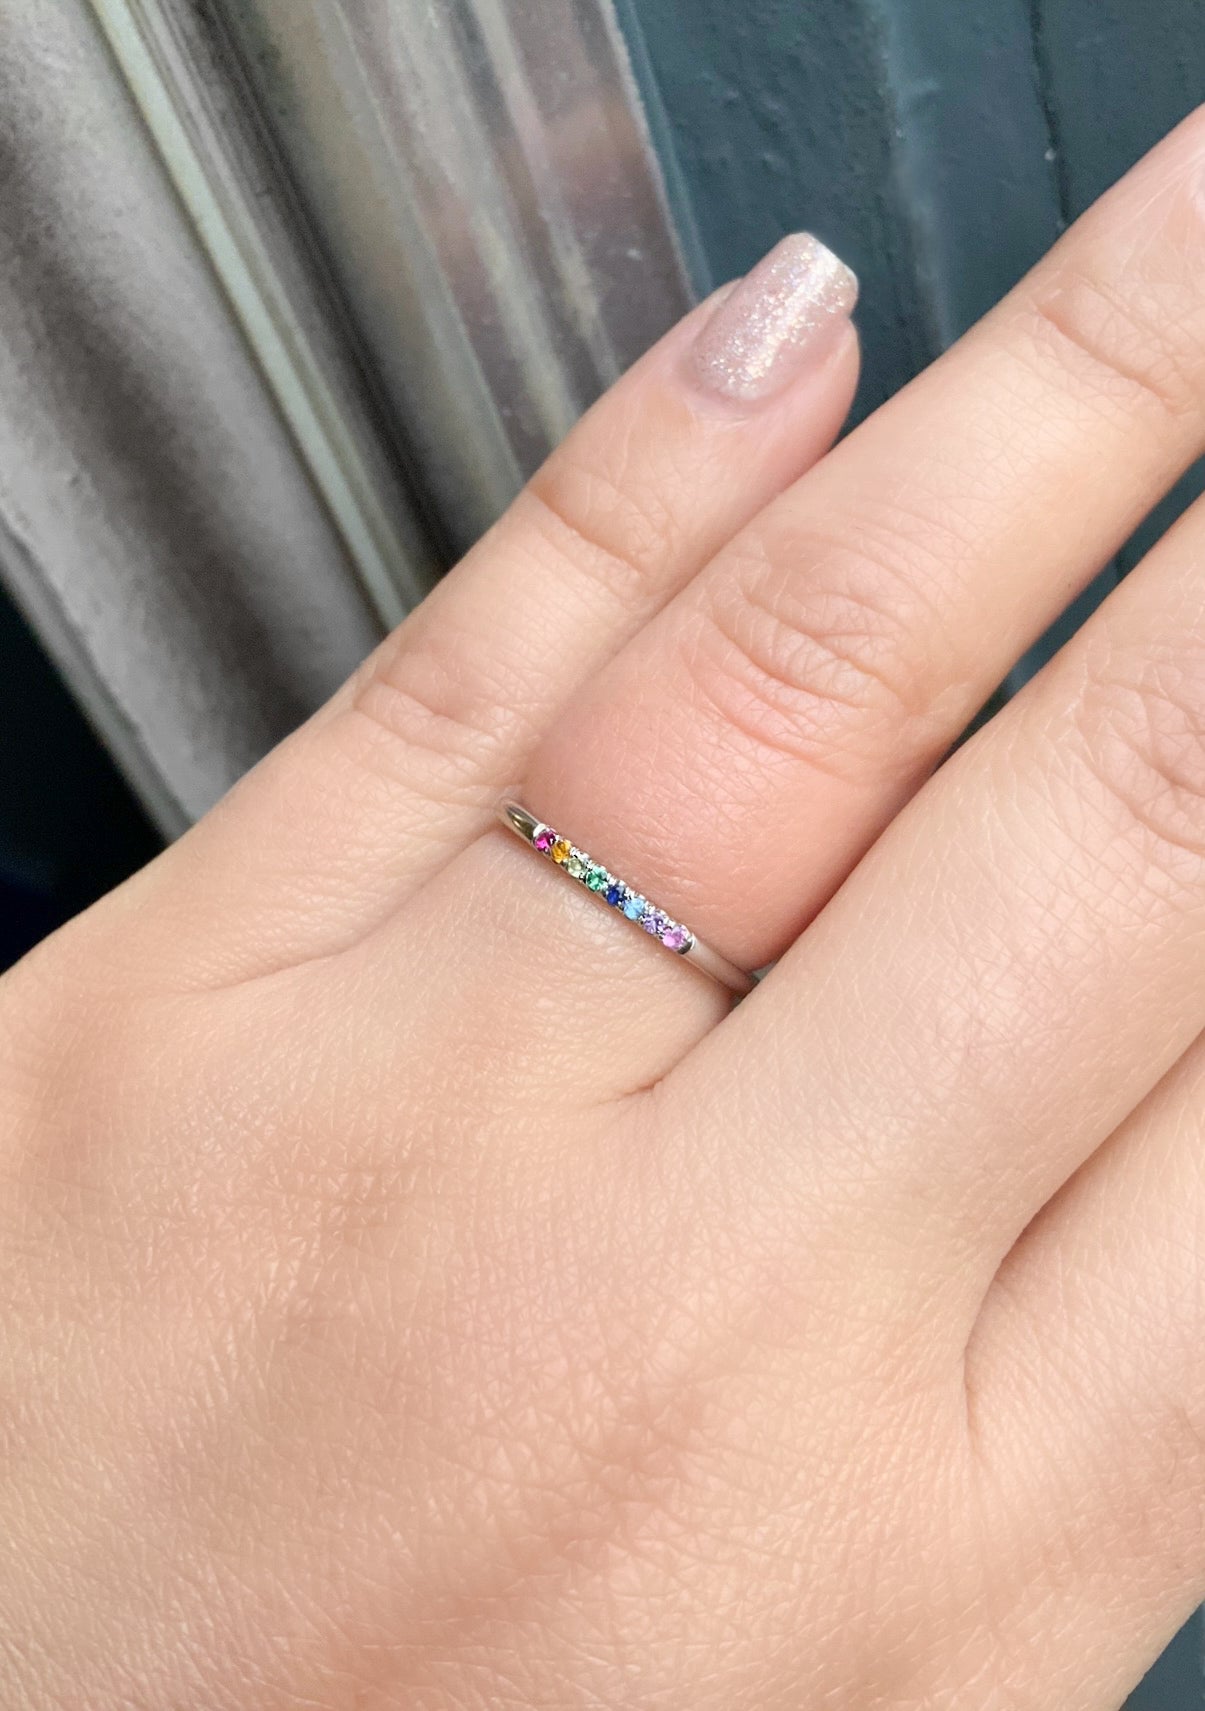 Rainbow Stacking Ring/ 1.5mm Mix Color Pave Band/ Thin Birthstone Family Ring/ Minimalist Pave Gemstone Midi Ring/ Rainbow Index or Thumb Ring